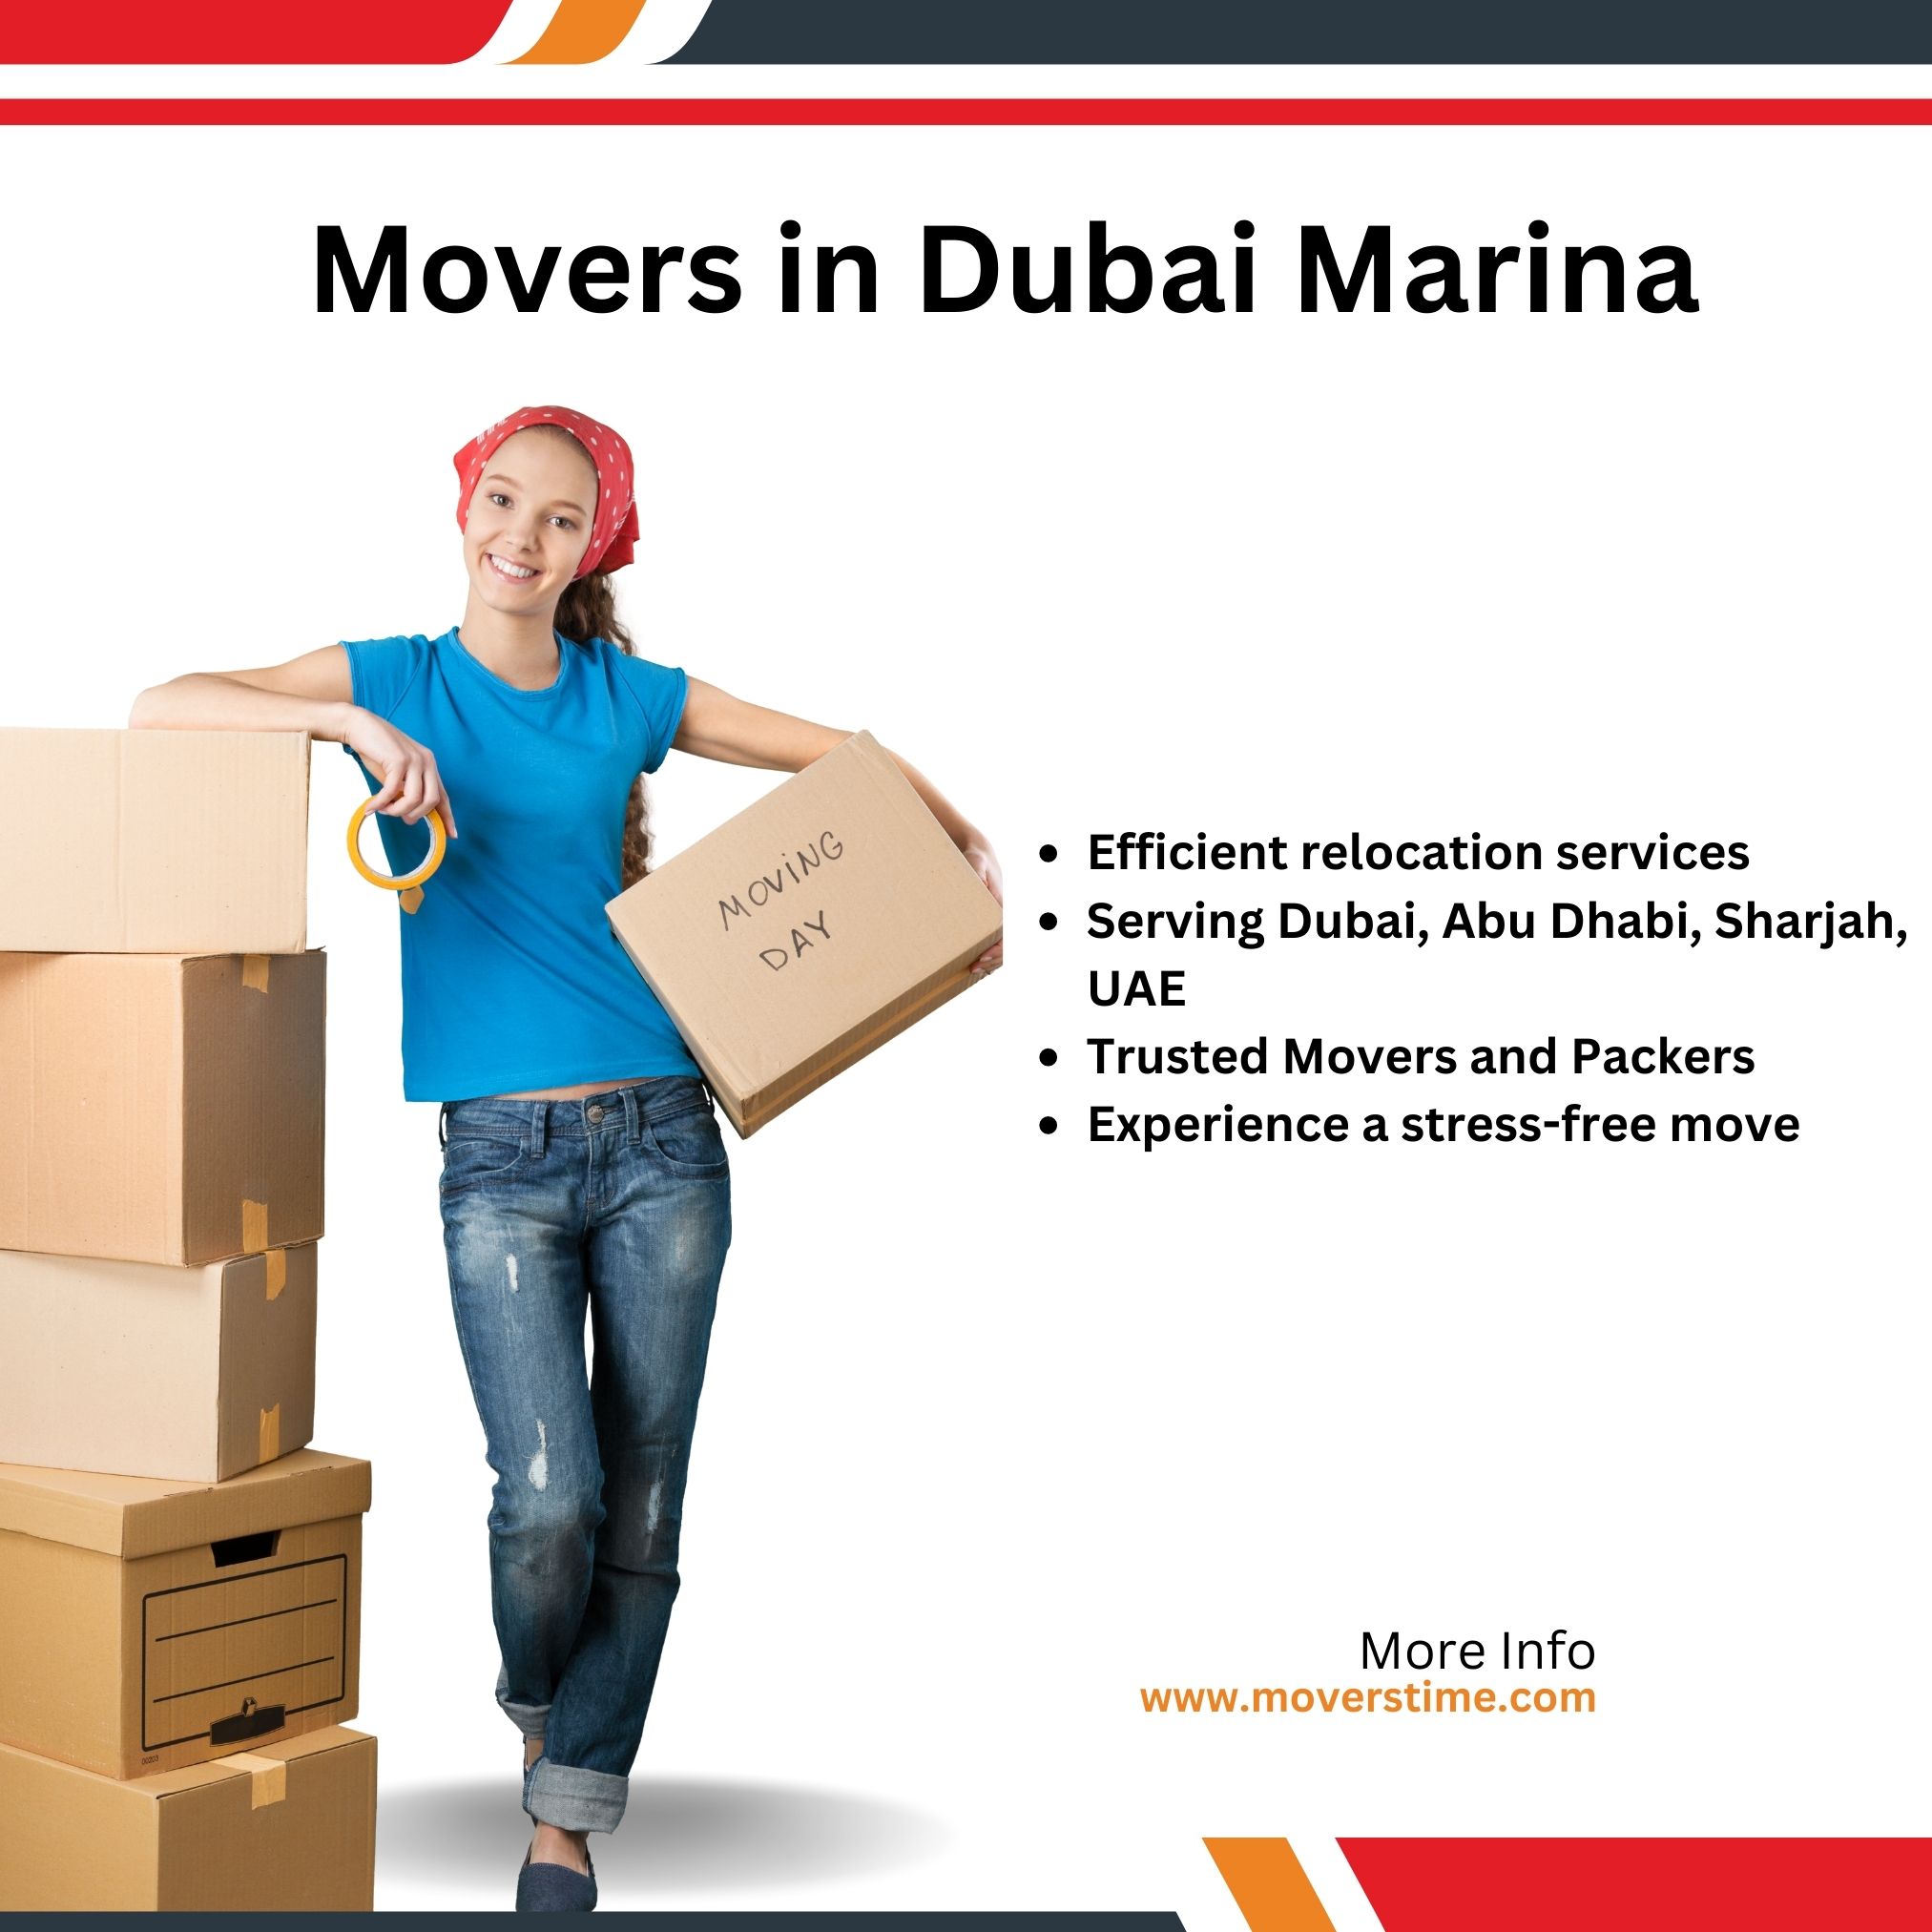 Movers-and-Packers-in-Dubai.jpg